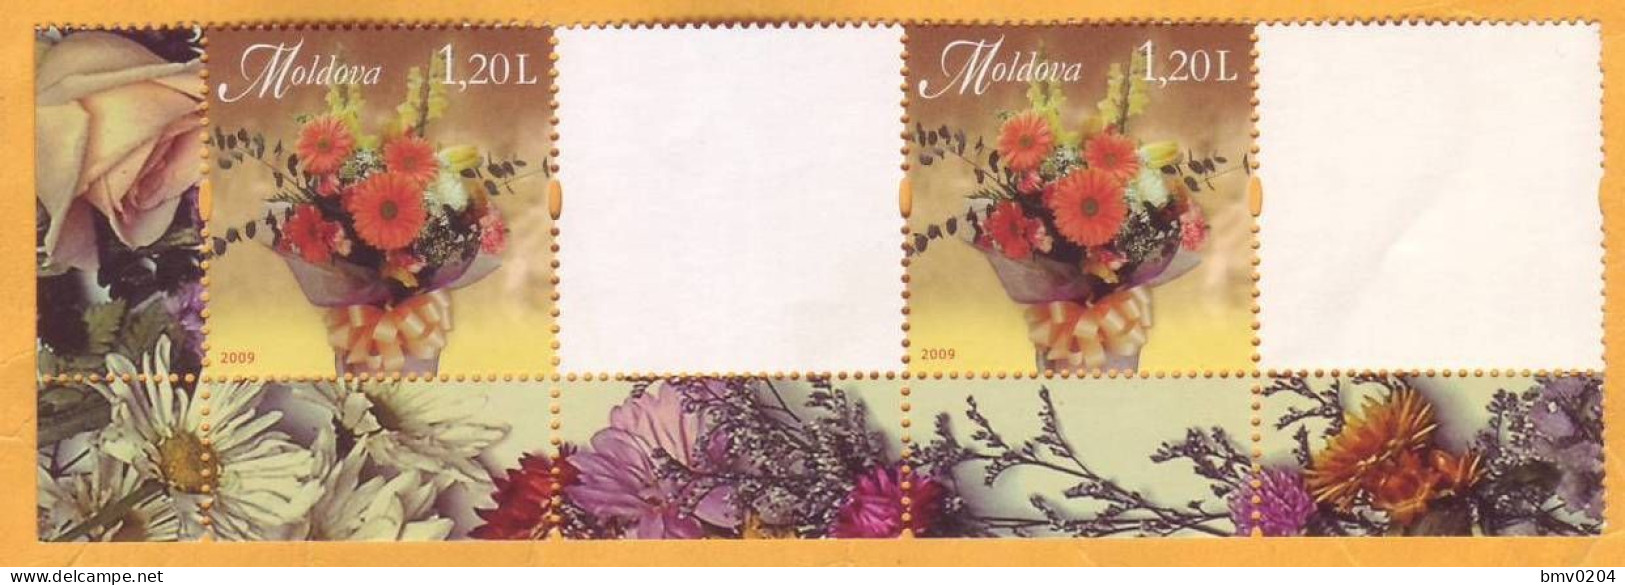 2009 2013 Moldova Personalized Postage Stamps, Issue 1.  SAMPLES. Wildflowers  2v  Mint - Moldawien (Moldau)